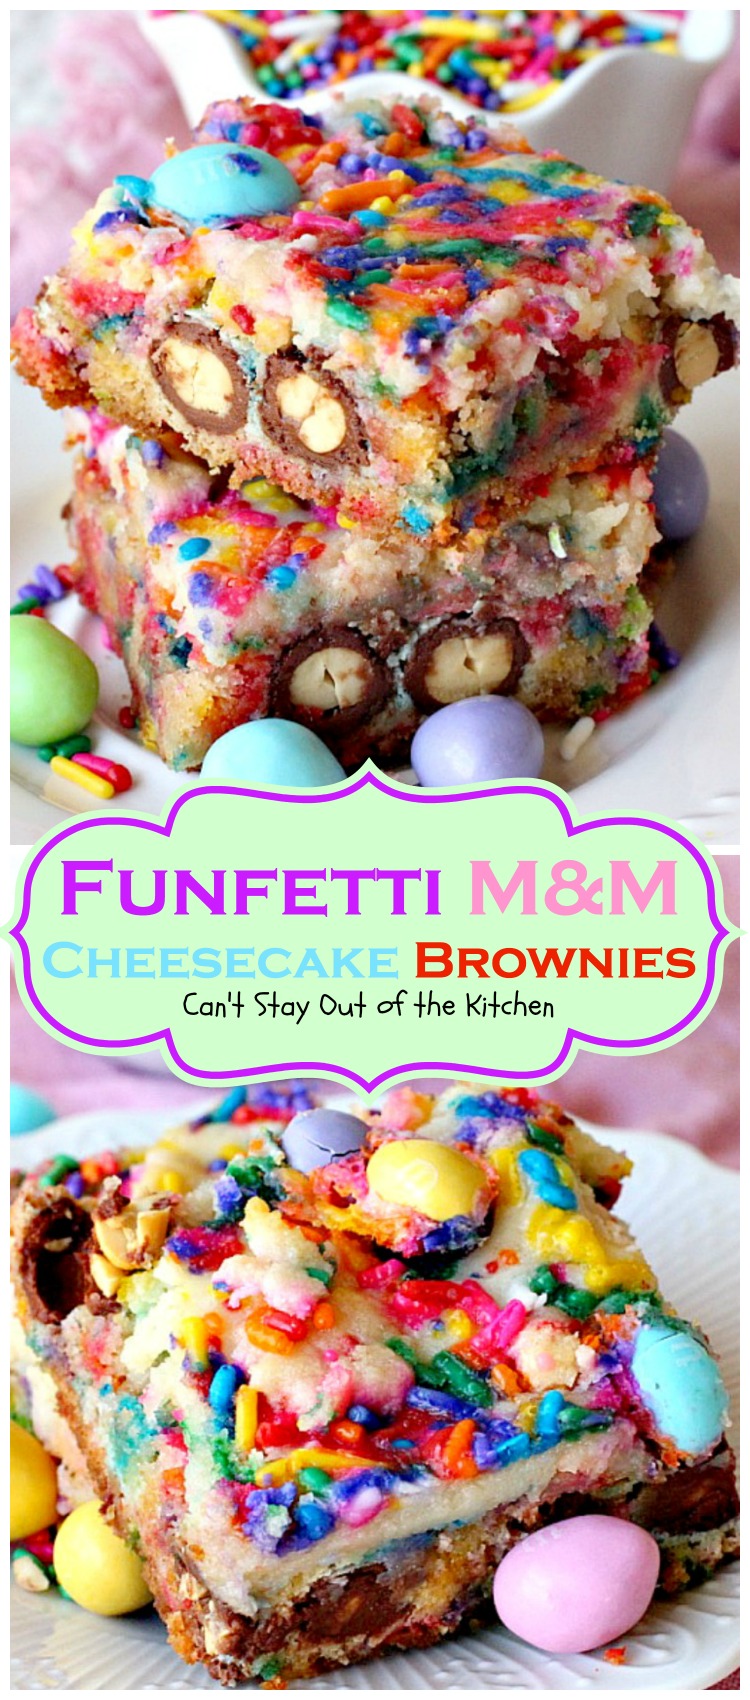 Funfetti M&M Cheesecake Brownies | Can't Stay Out of the Kitchen